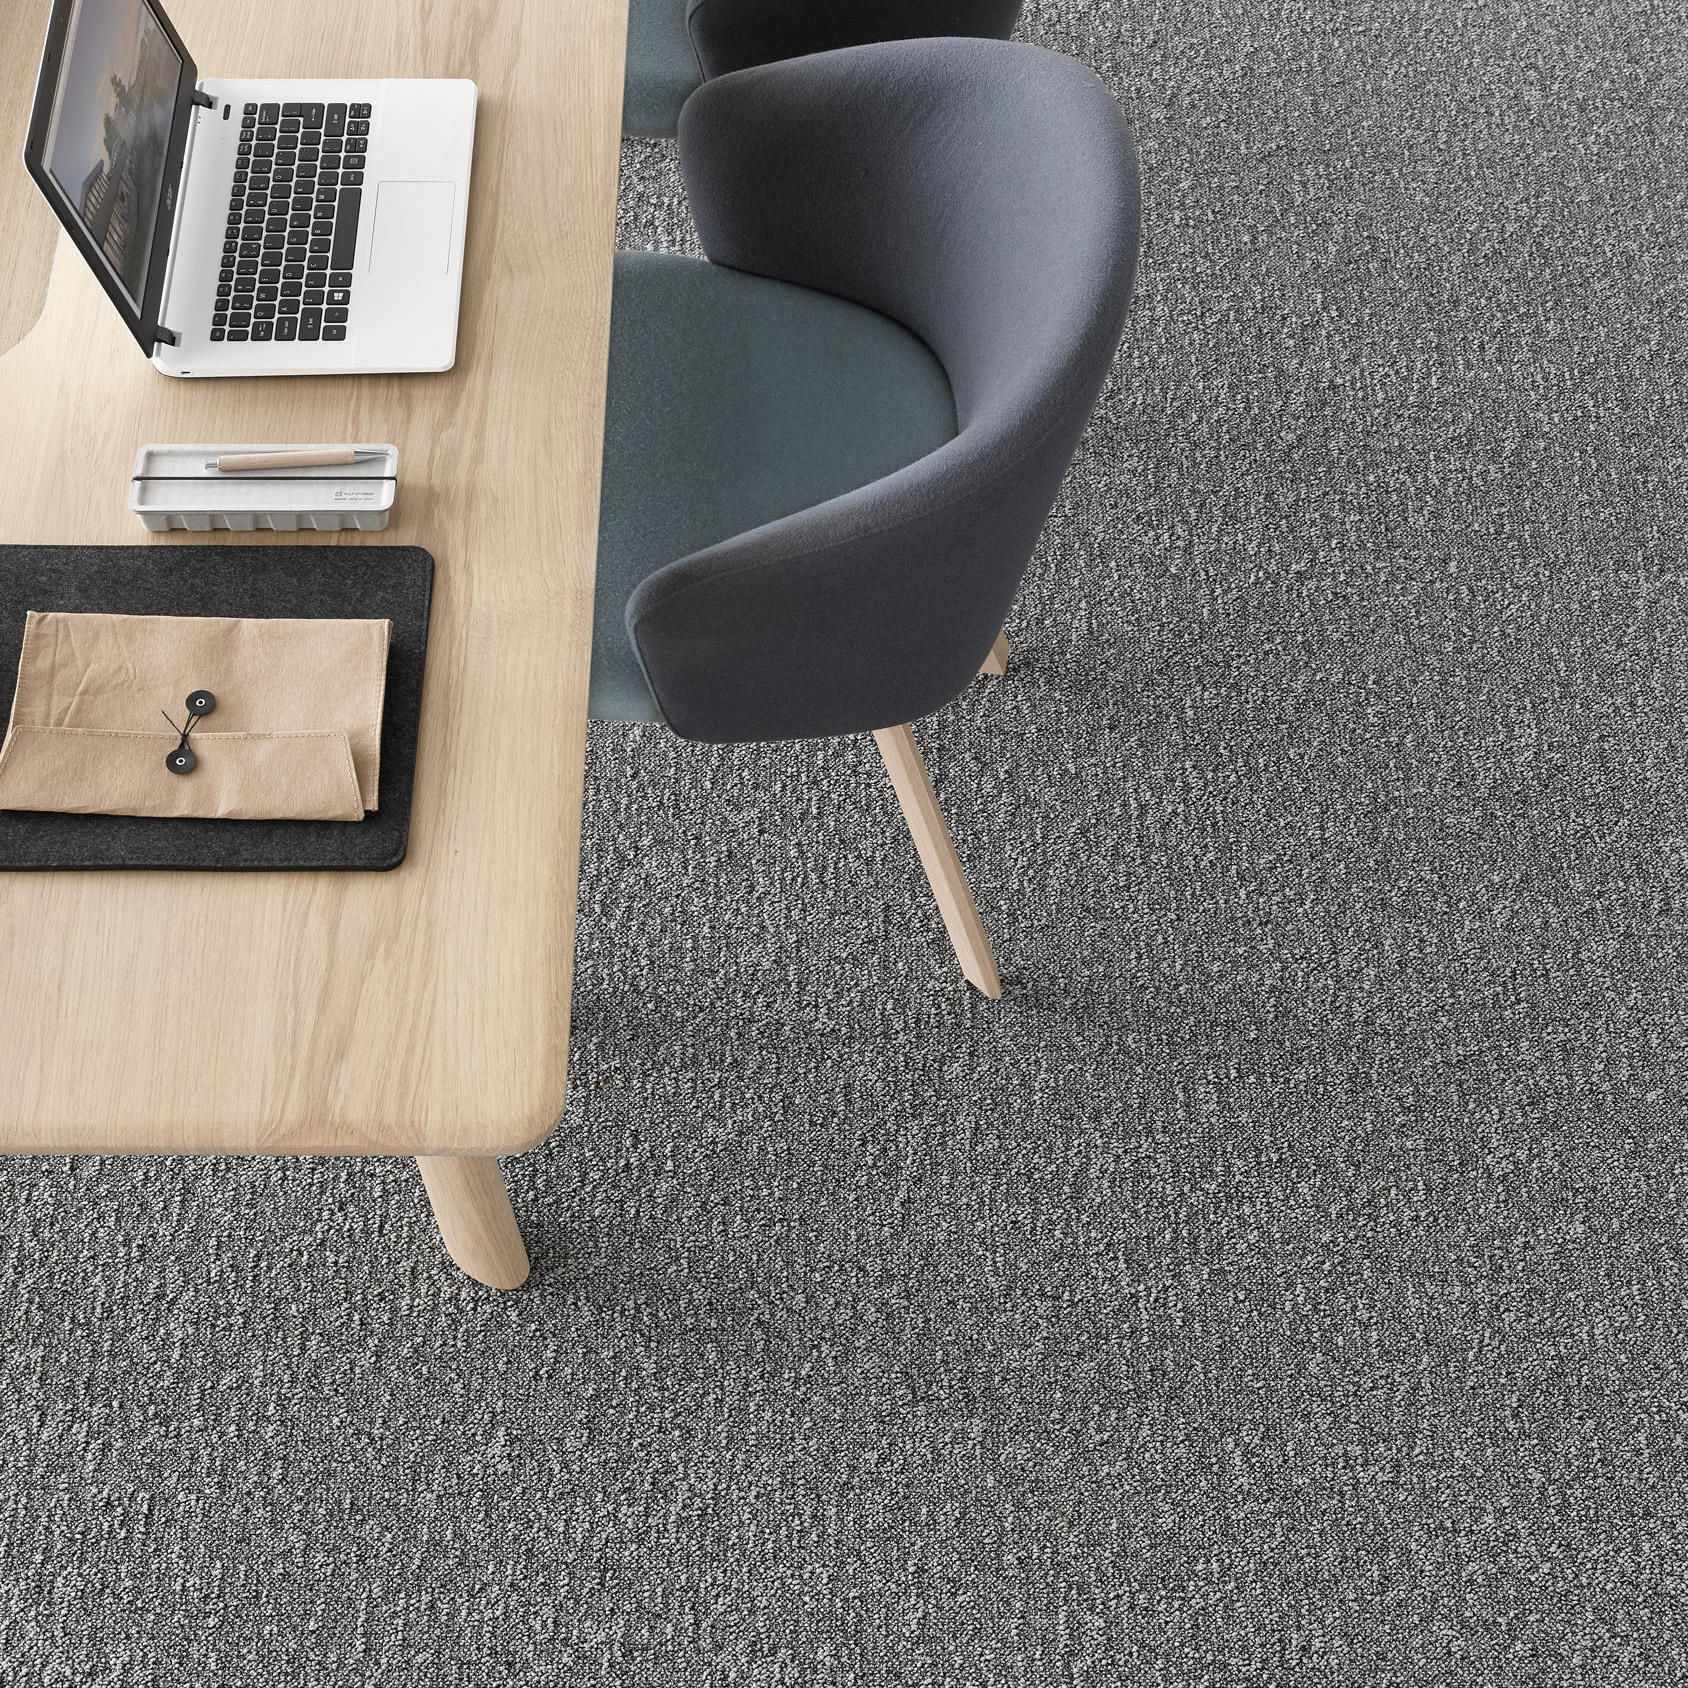 Desso Airmaster Earth Carpet Tiles used in office setting with table and chair